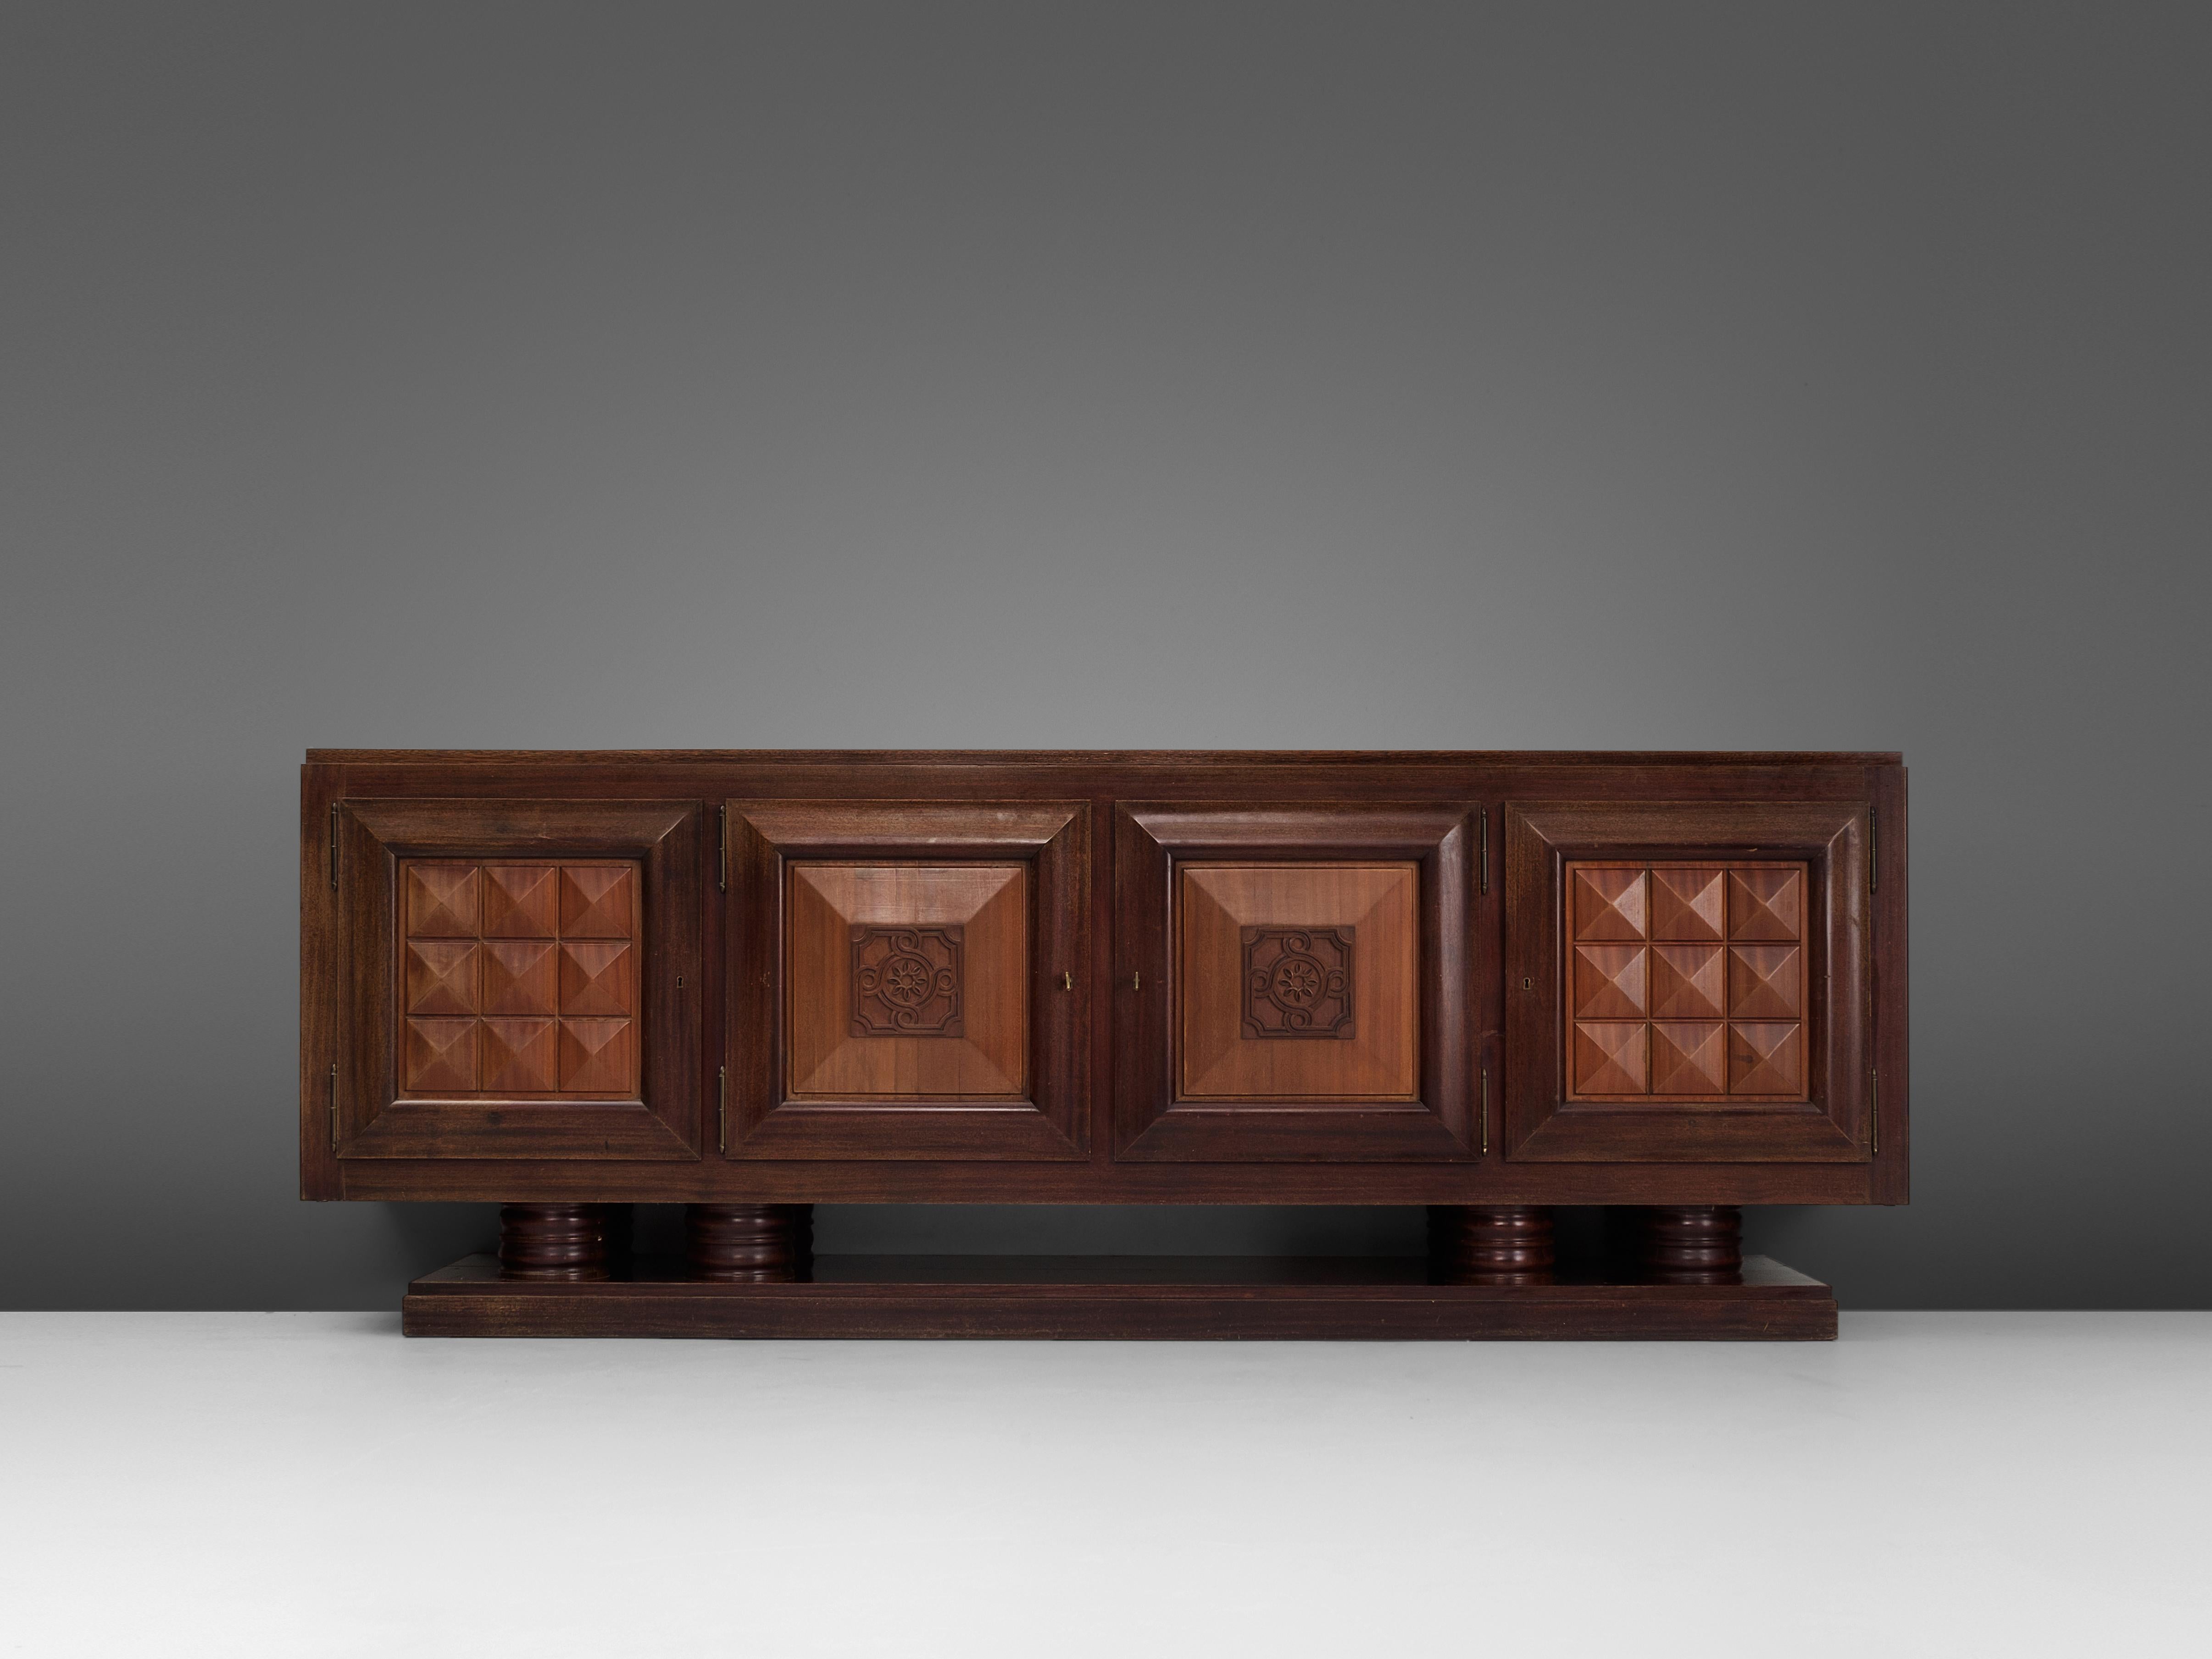 Gaston Poisson, credenza, cedar, mahogany, France, 1930s

Sturdy credenza in oak with graphical door panels and parquet top. This four-door sideboard is equipped with several shelves and drawers which provide plenty of storage space. The shelves are